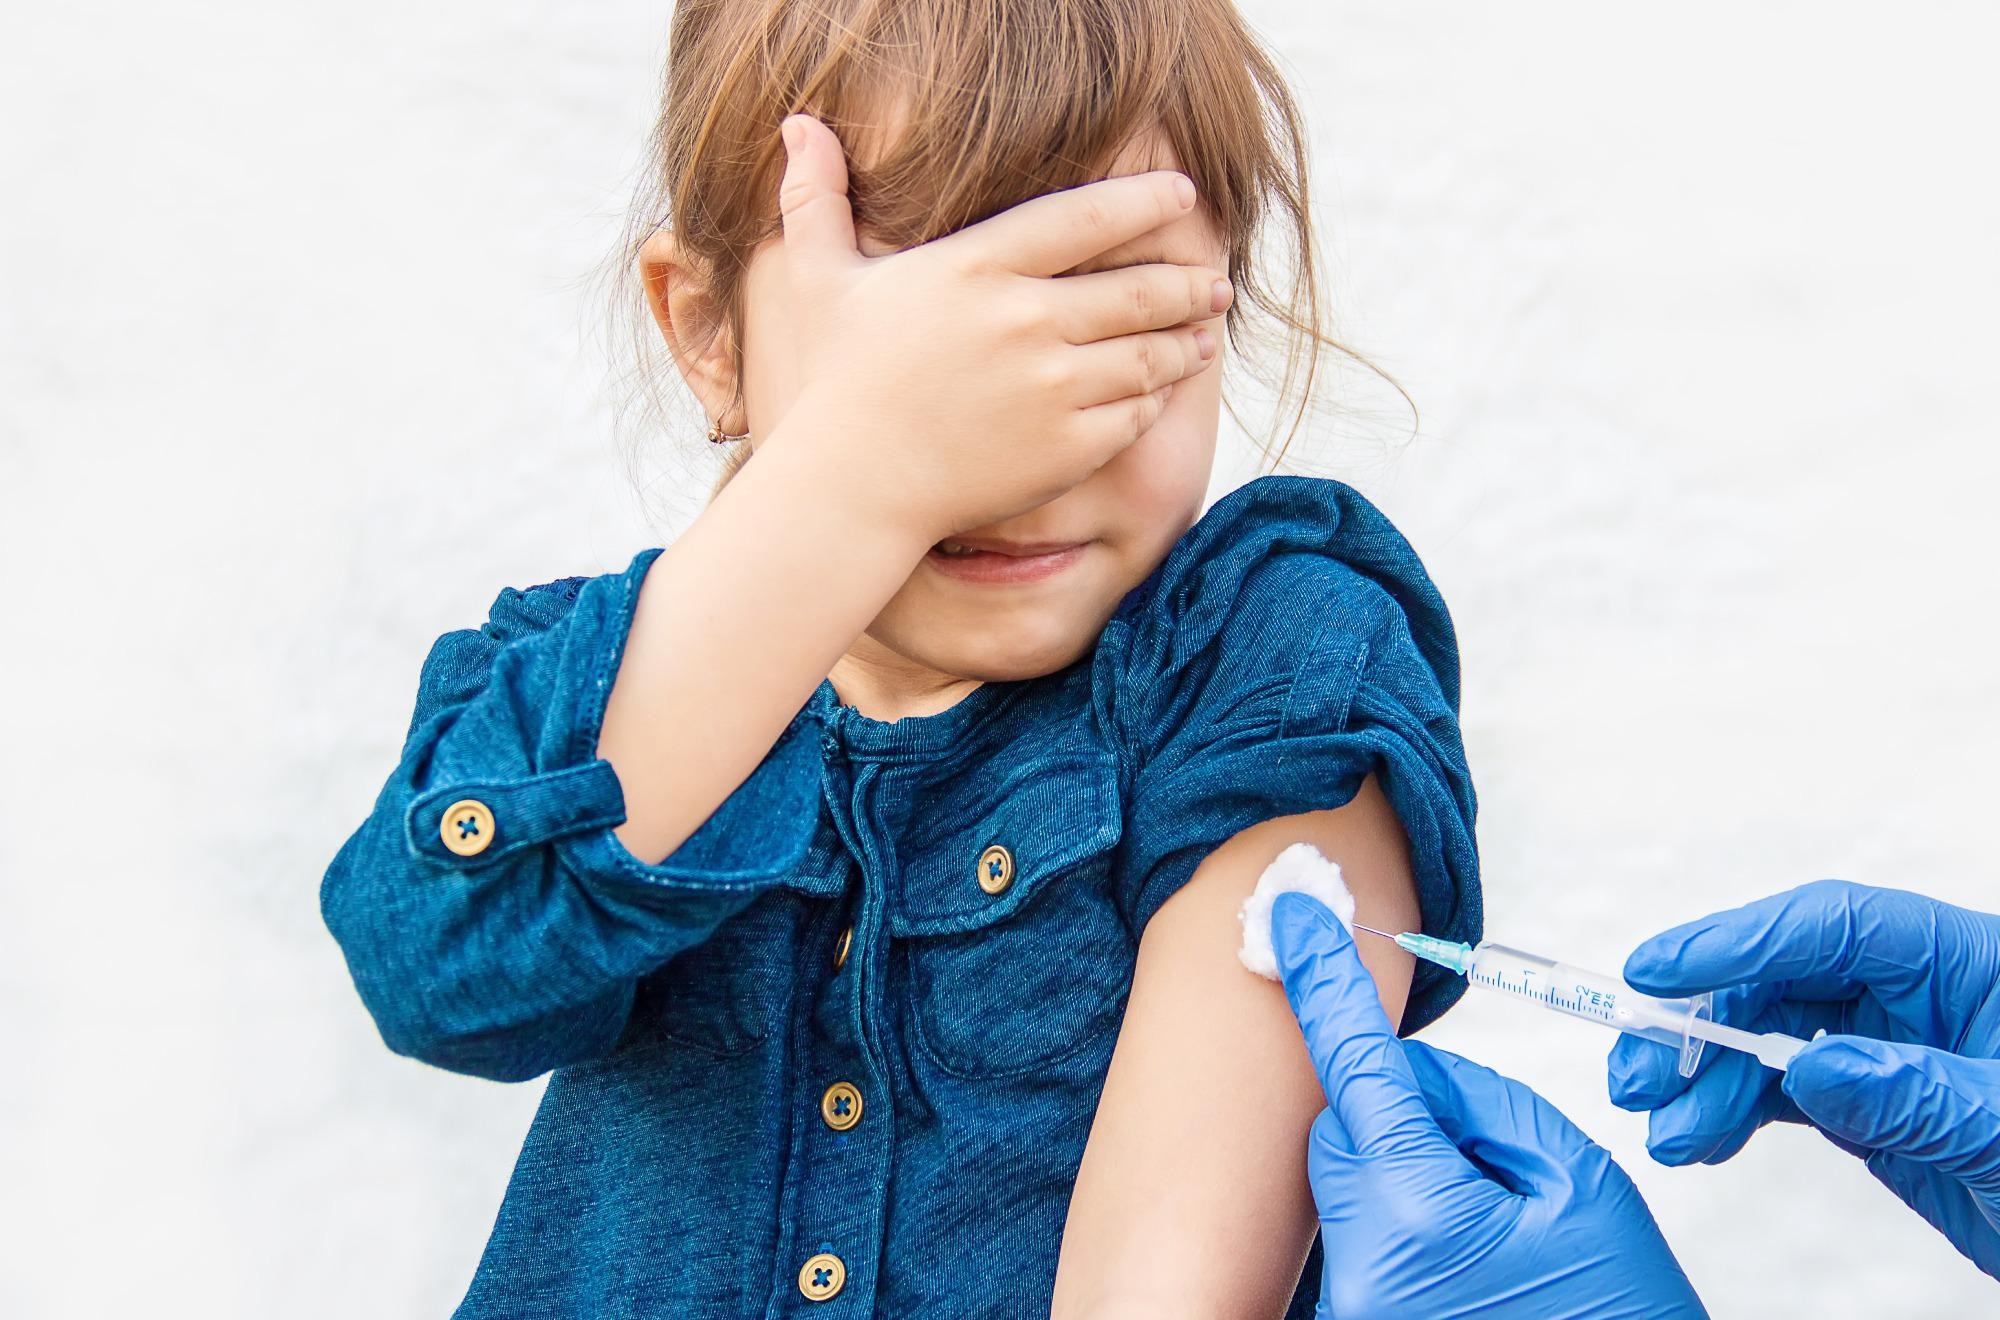 Study: Parents’ intention to vaccinate their child for COVID-19: a cross-sectional survey (CoVAccS – wave 3). Image Credit: Tatevosian Yana / Shutterstock